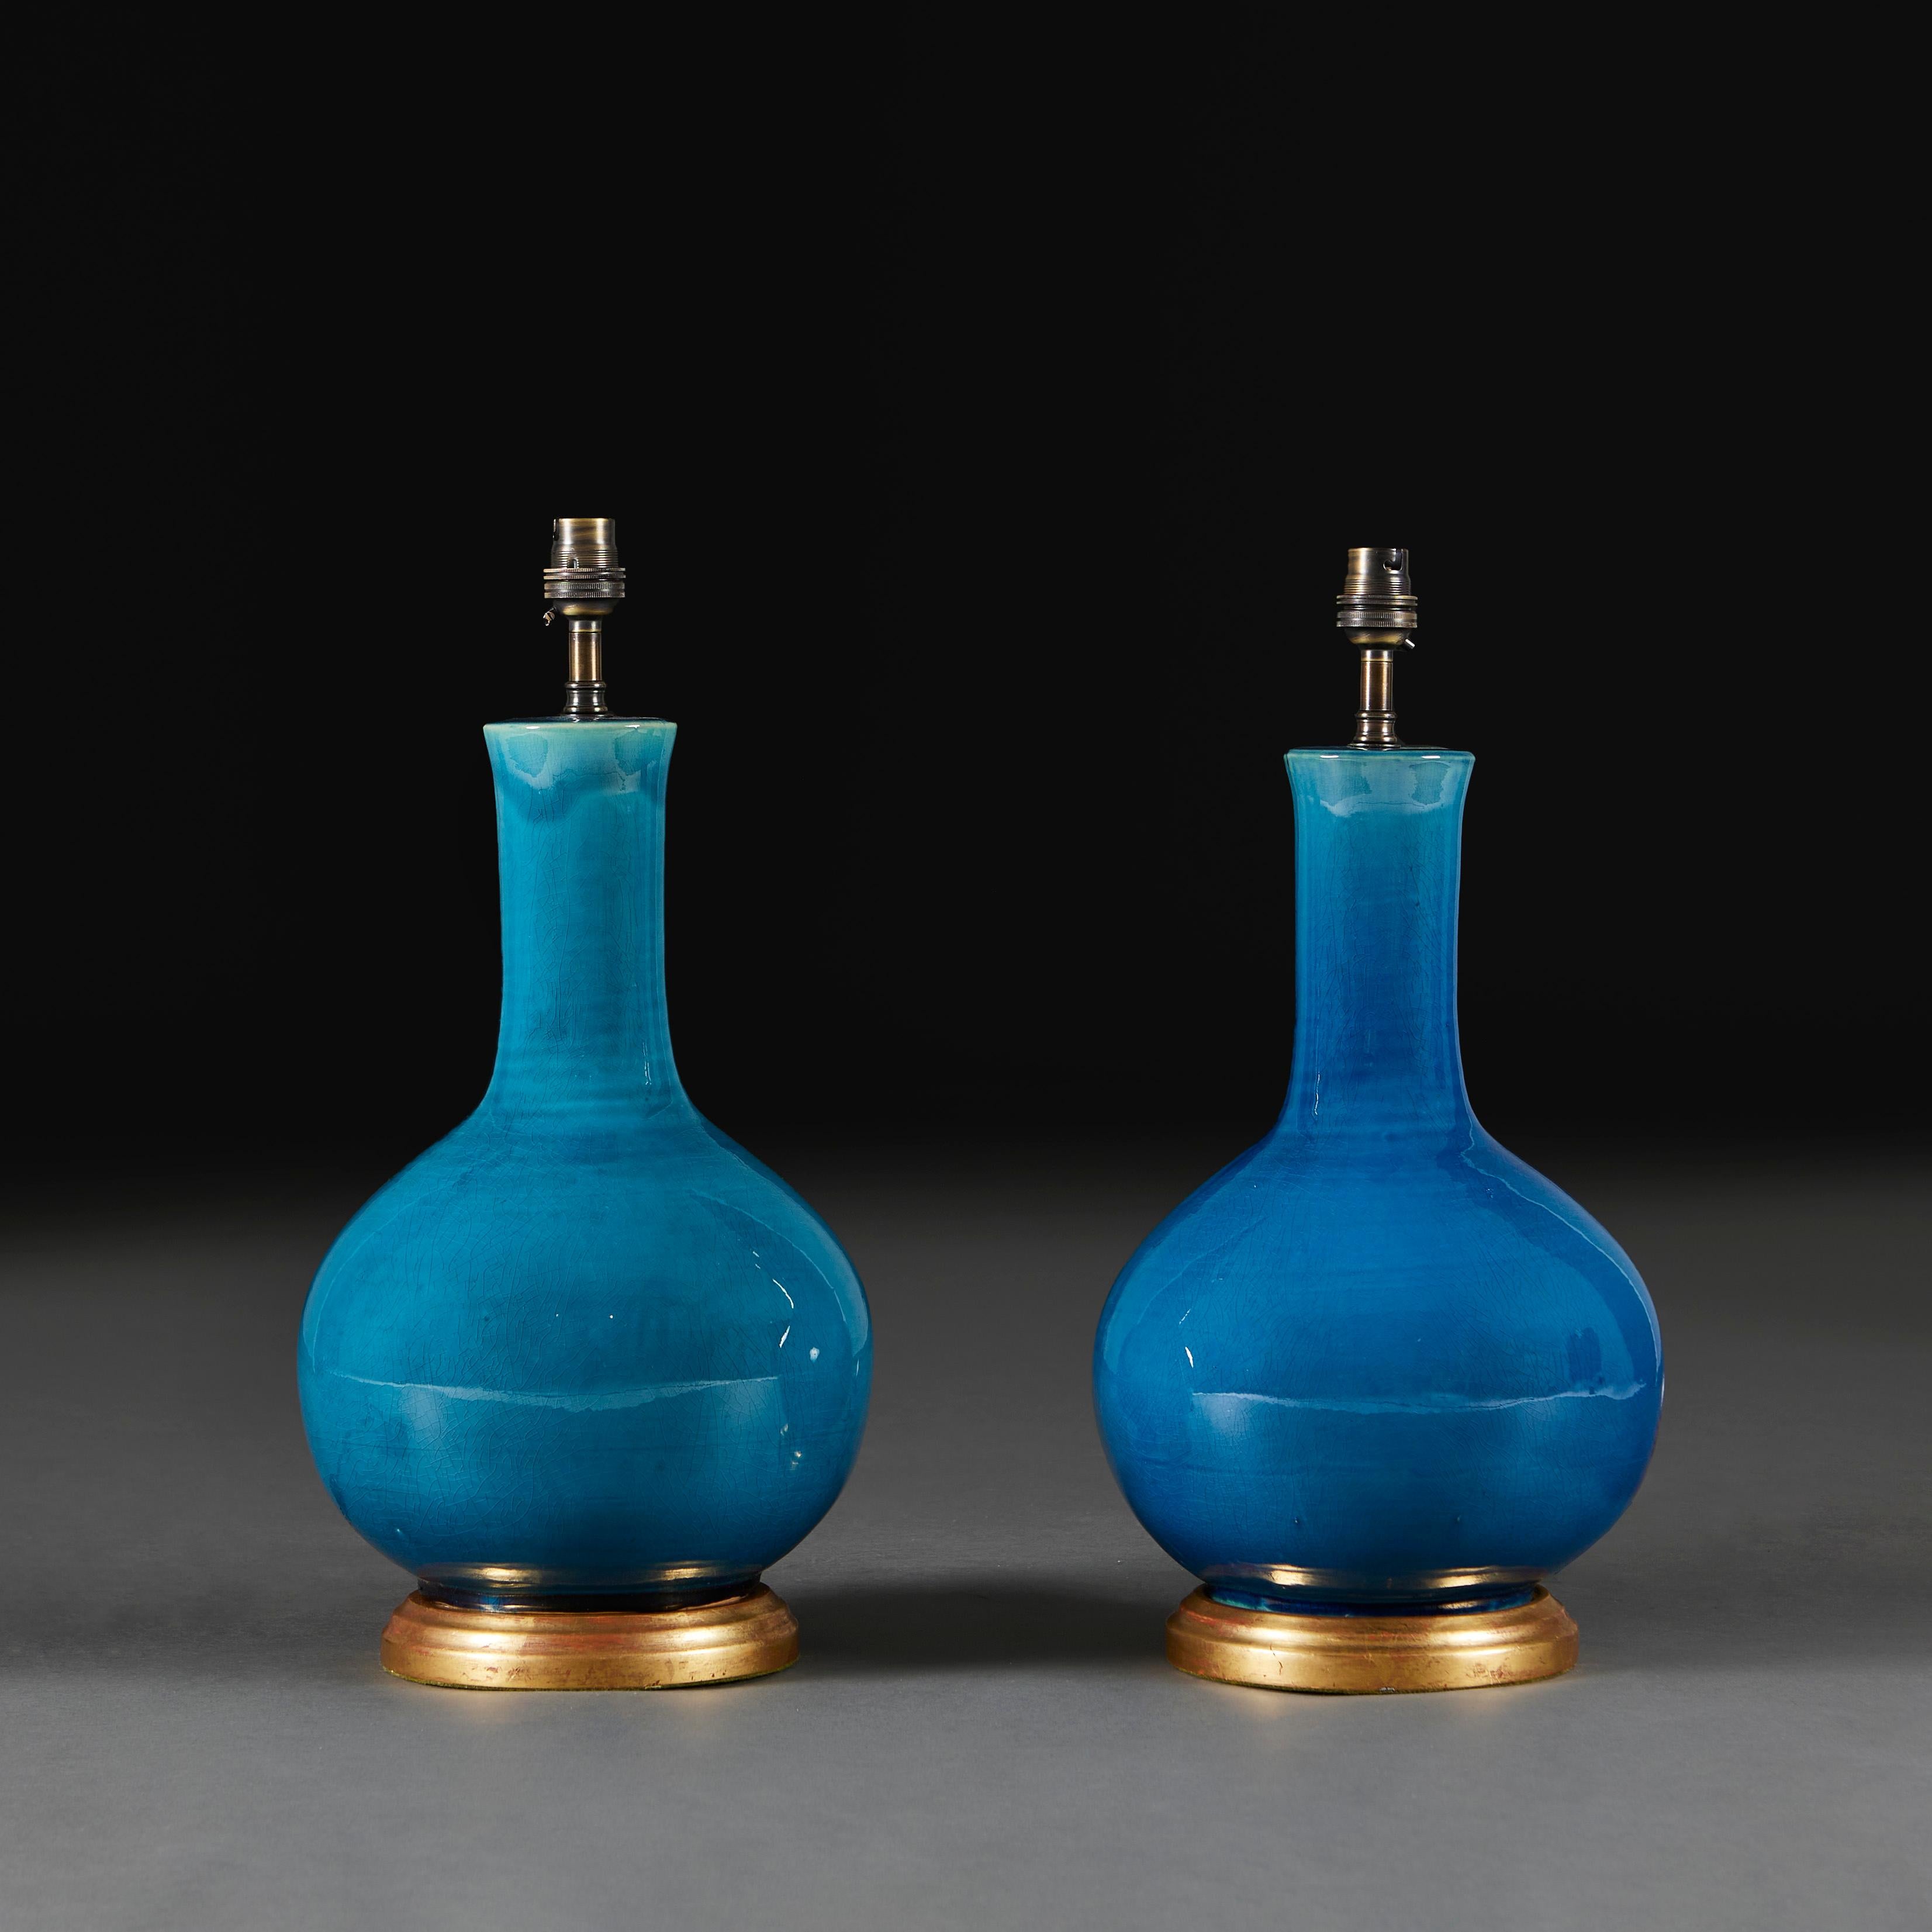 Glazed A Pair of Chinese Turquoise Monochrome Glaze Table Lamps with Giltwood Bases